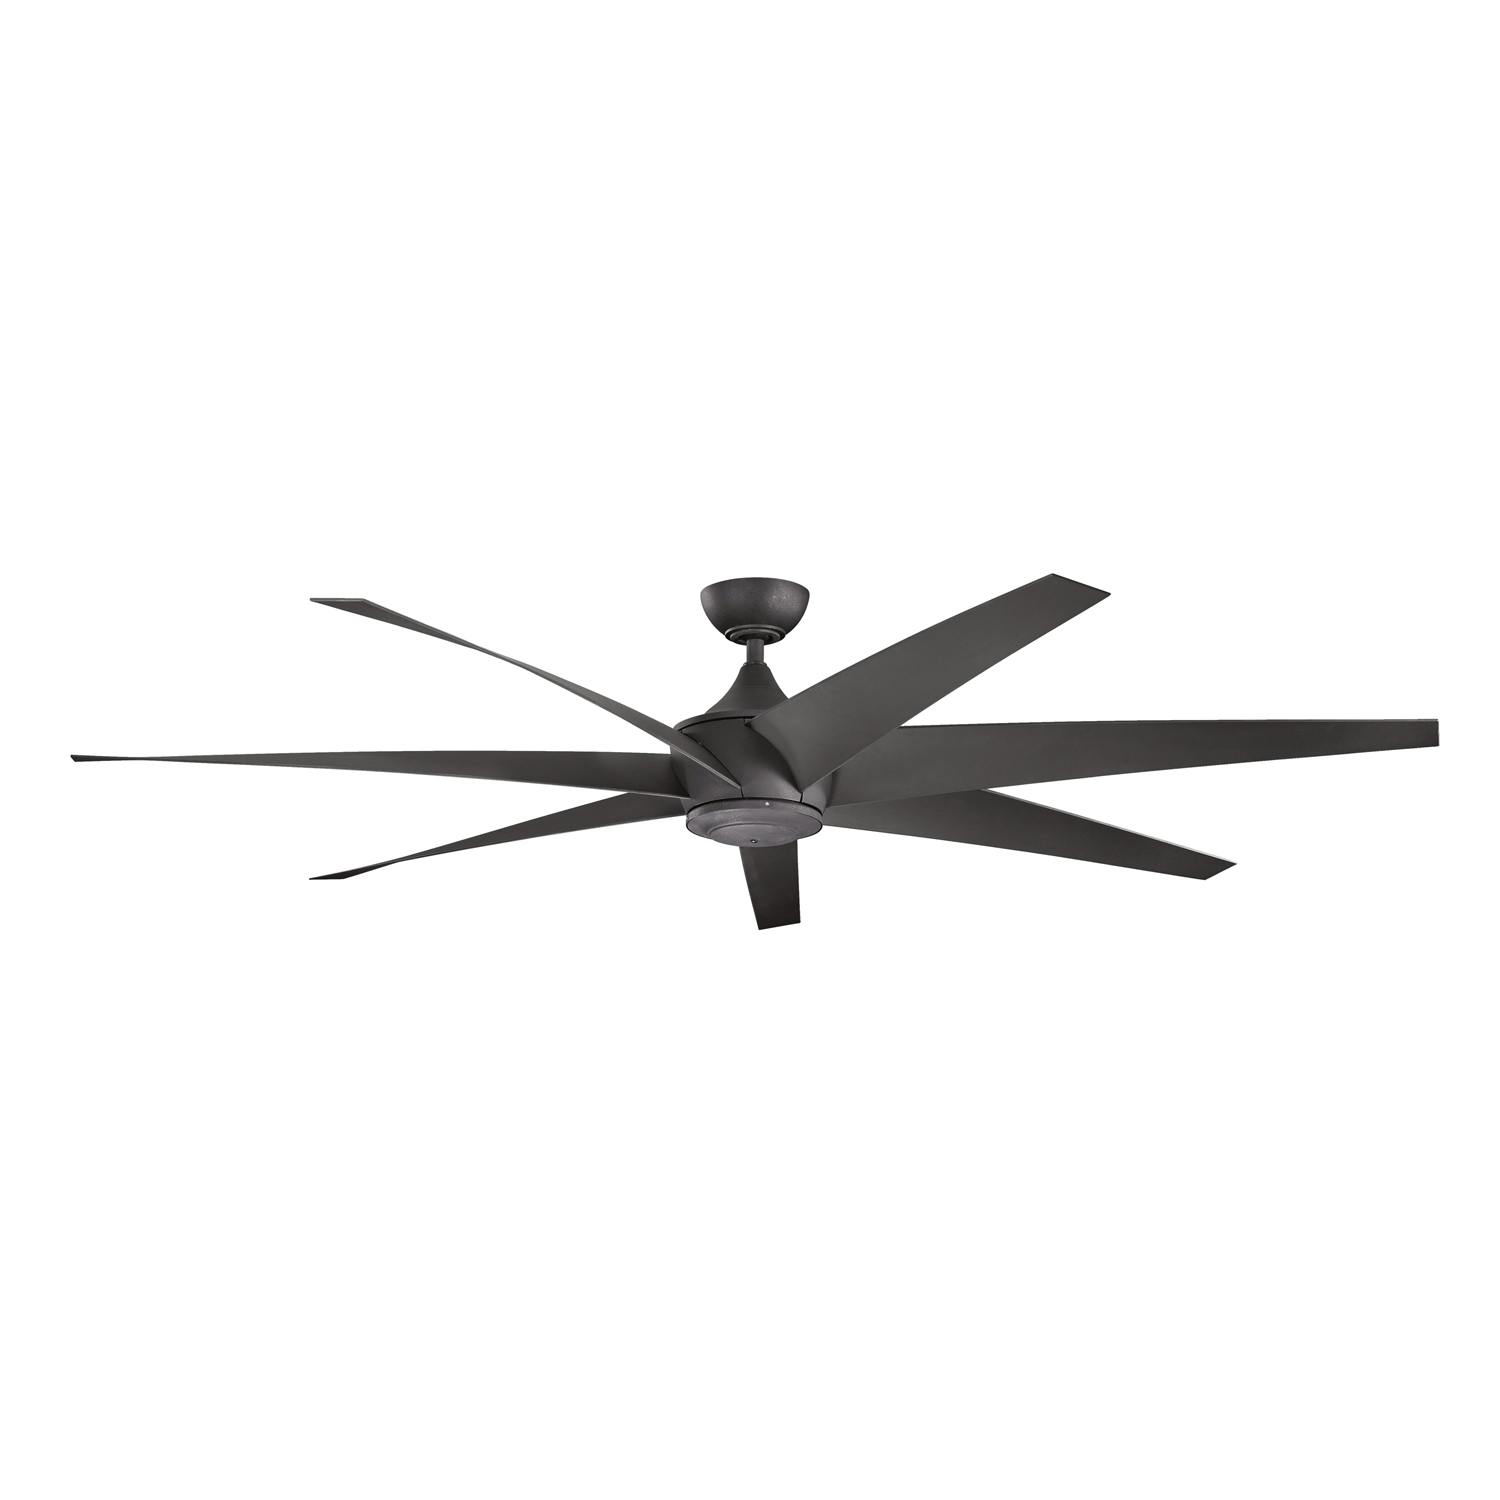 Lehr 80" Fan Black with Black Blades on a white background